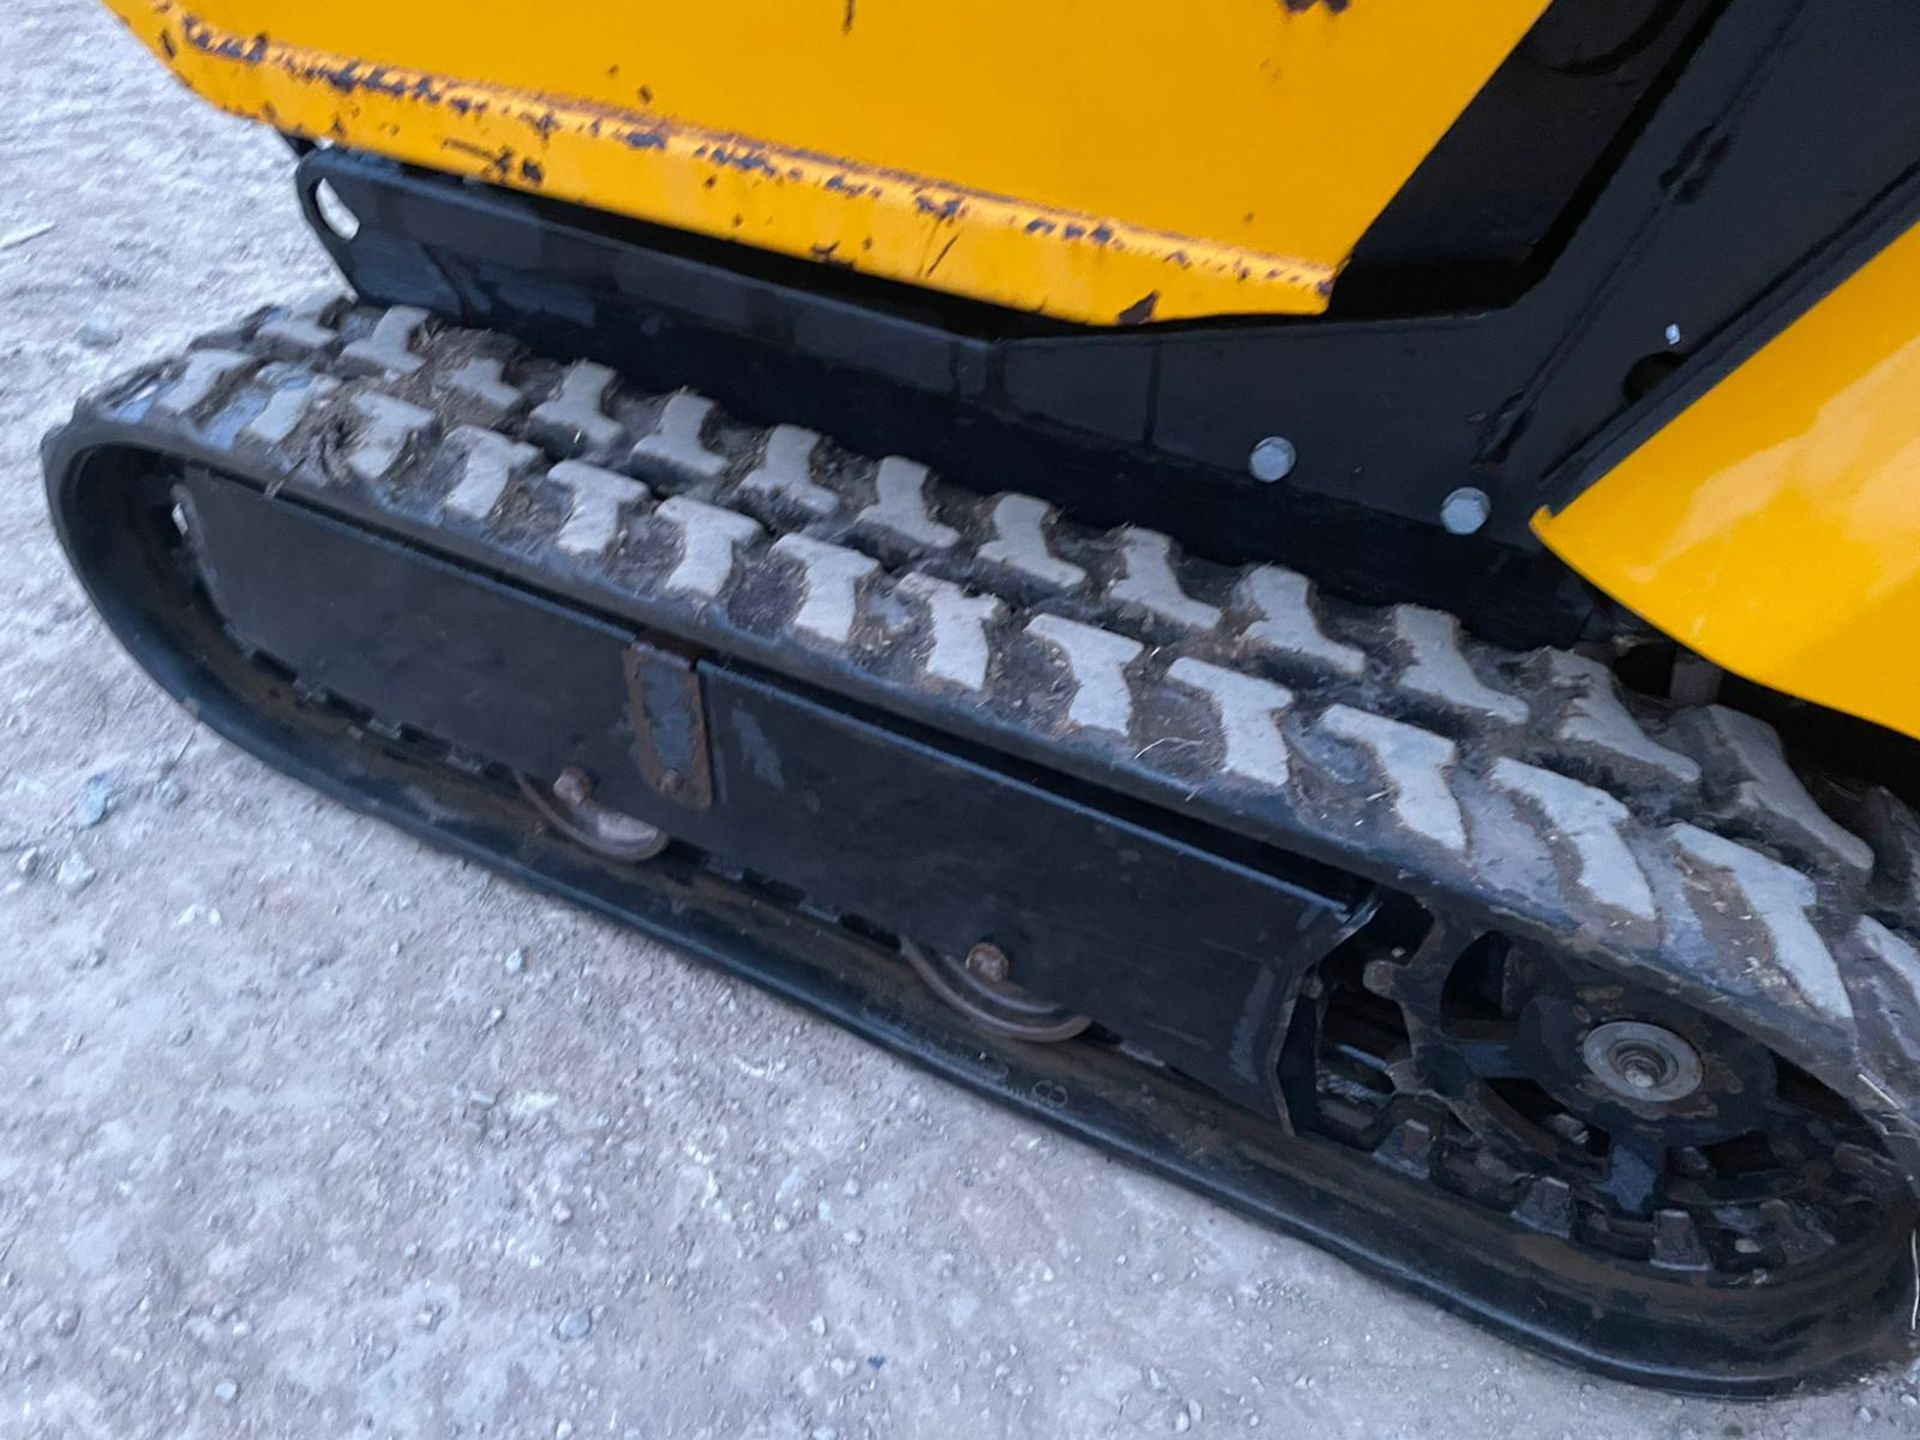 2019 JCB HTD-5 DIESEL TRACKED DUMPER, RUNS DRIVES AND DUMPS, 2 SPEED TRACKING, ELECTRIC START - Image 10 of 13